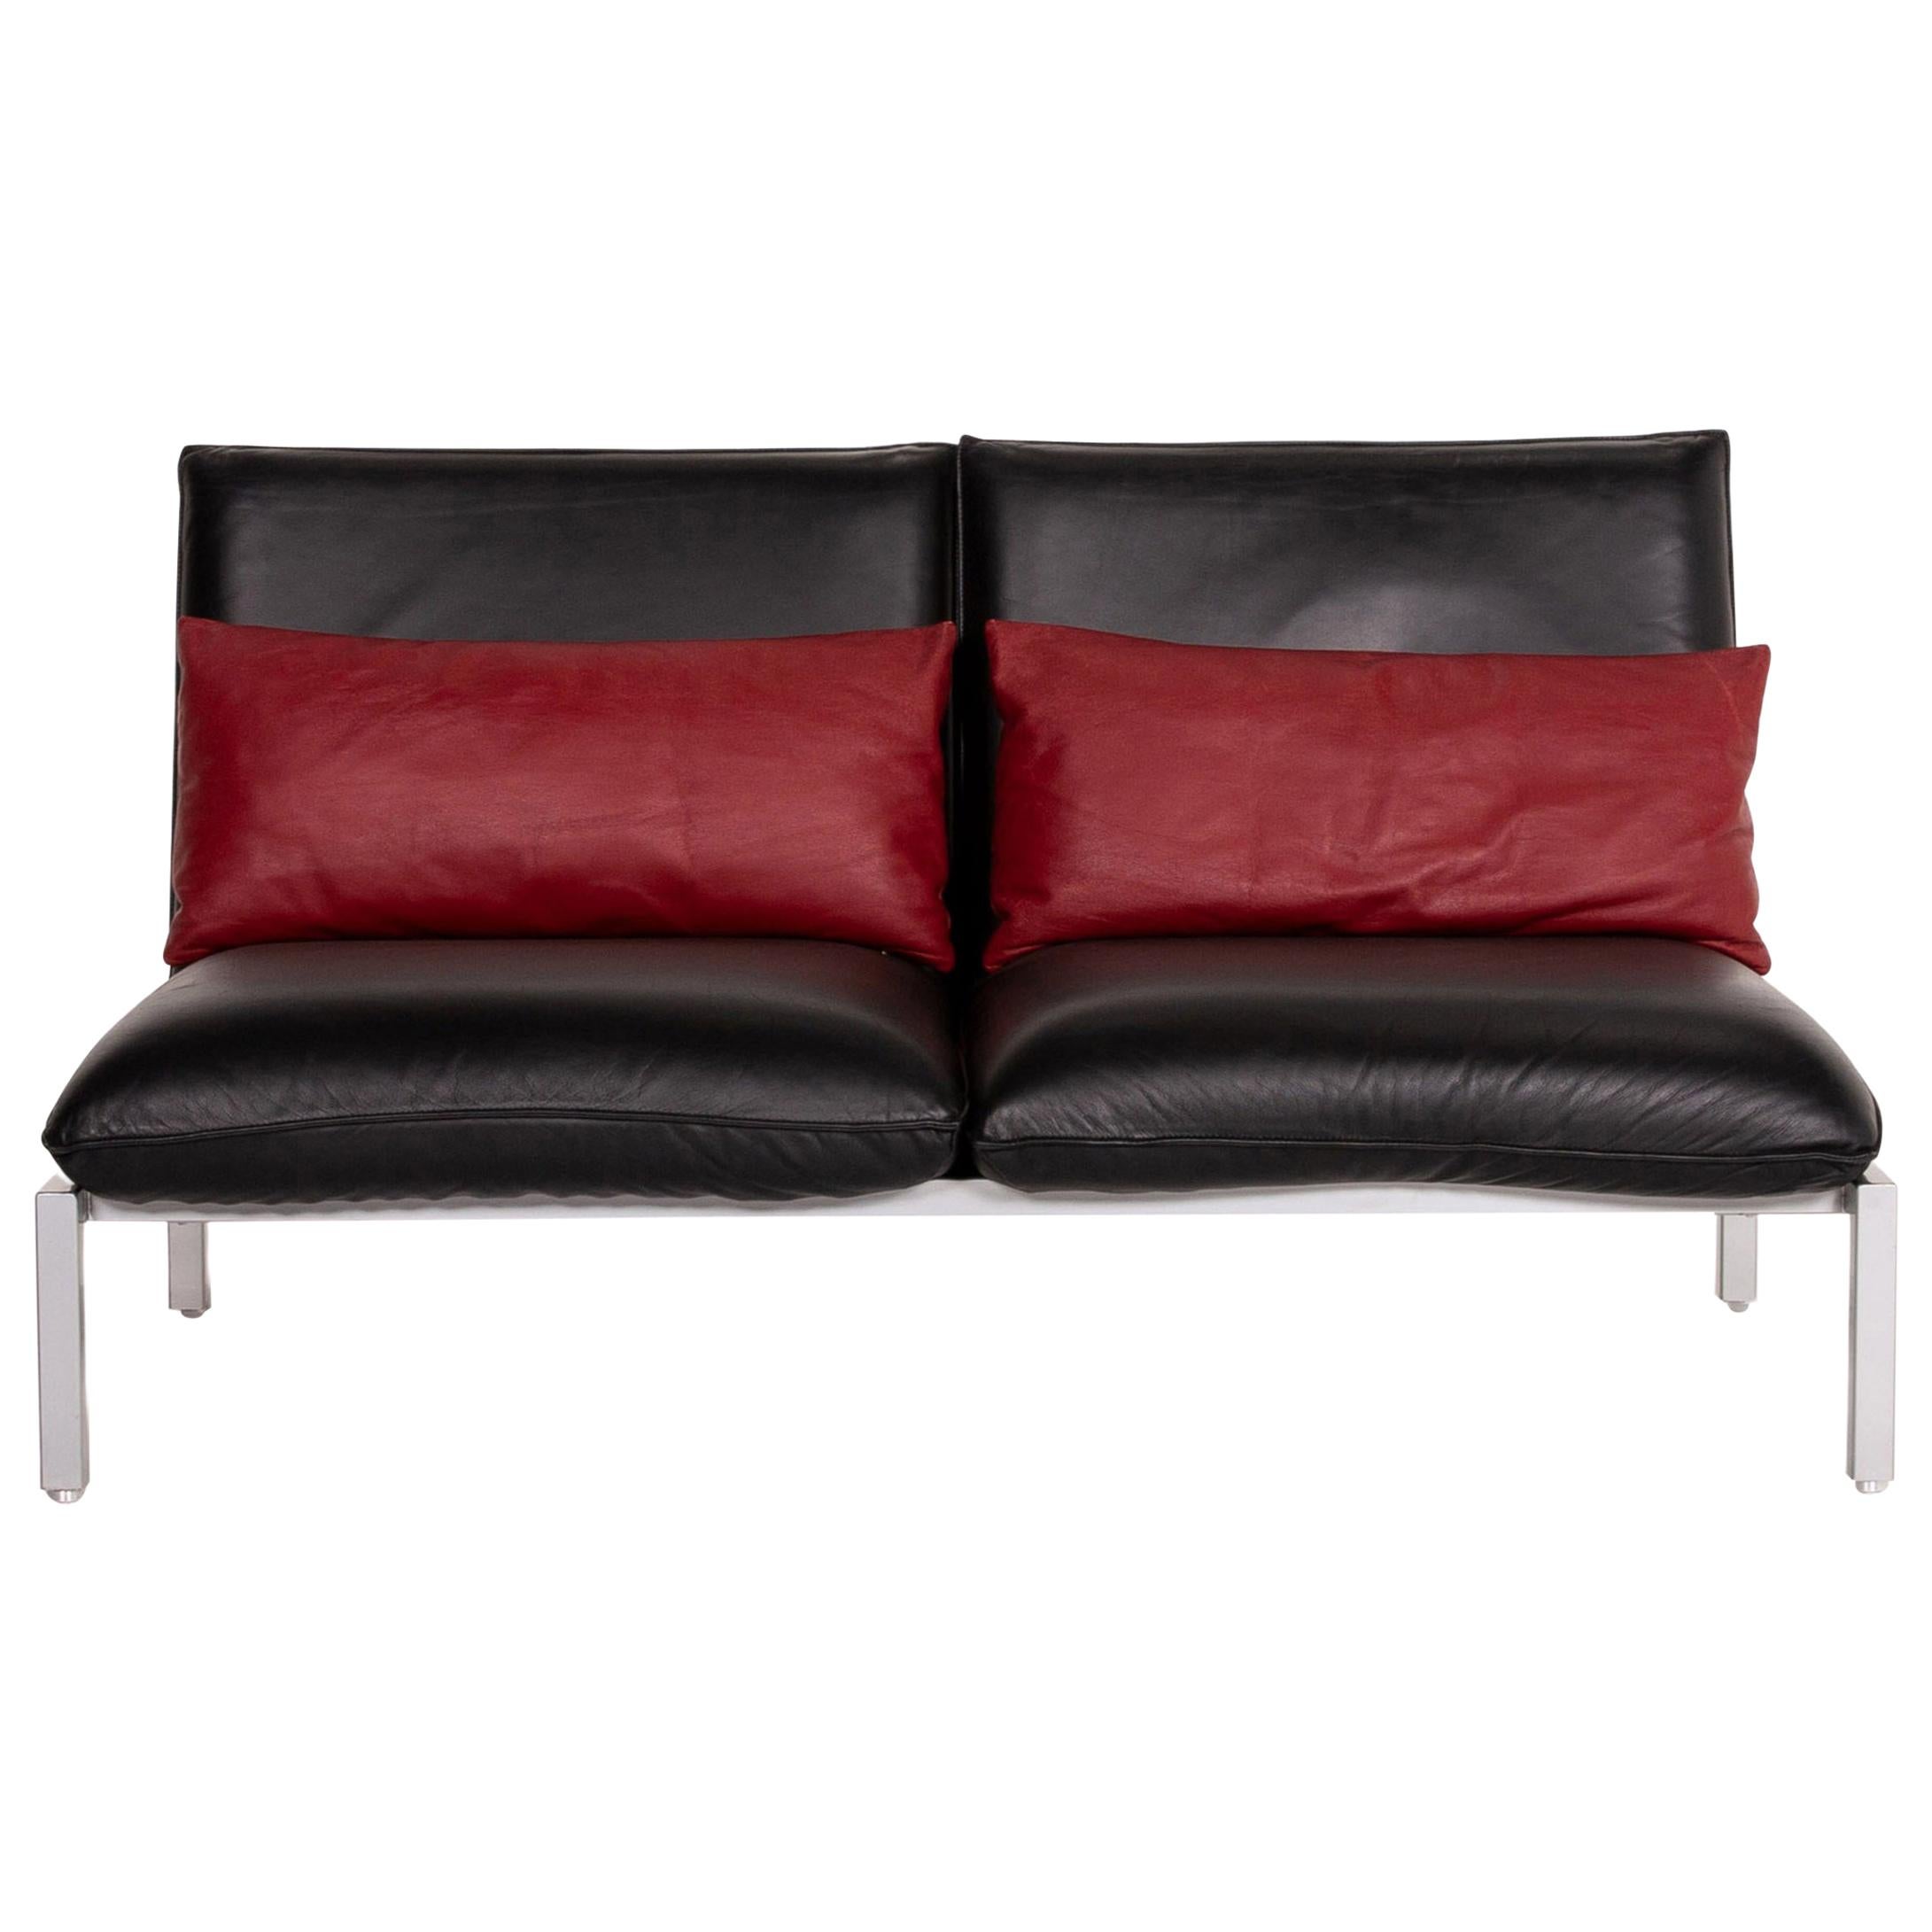 Brühl & Sippold Roro Leather Sofa Black Two-Seat Function Relax Function Couch For Sale